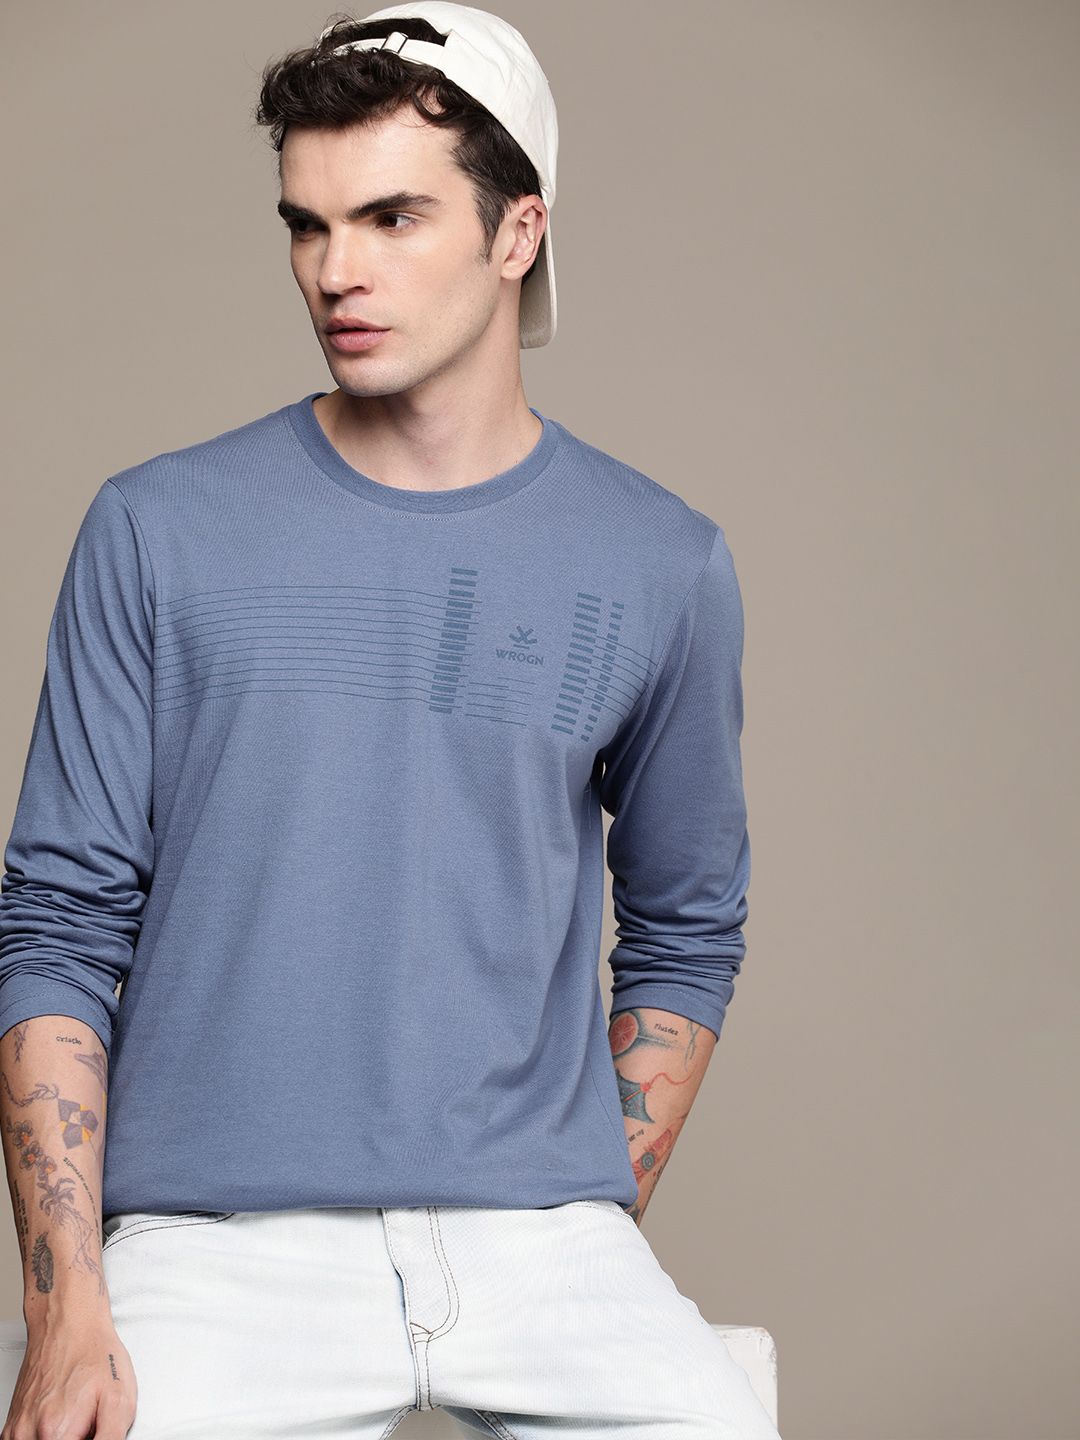 WROGN Striped Slim Fit Casual T-shirt